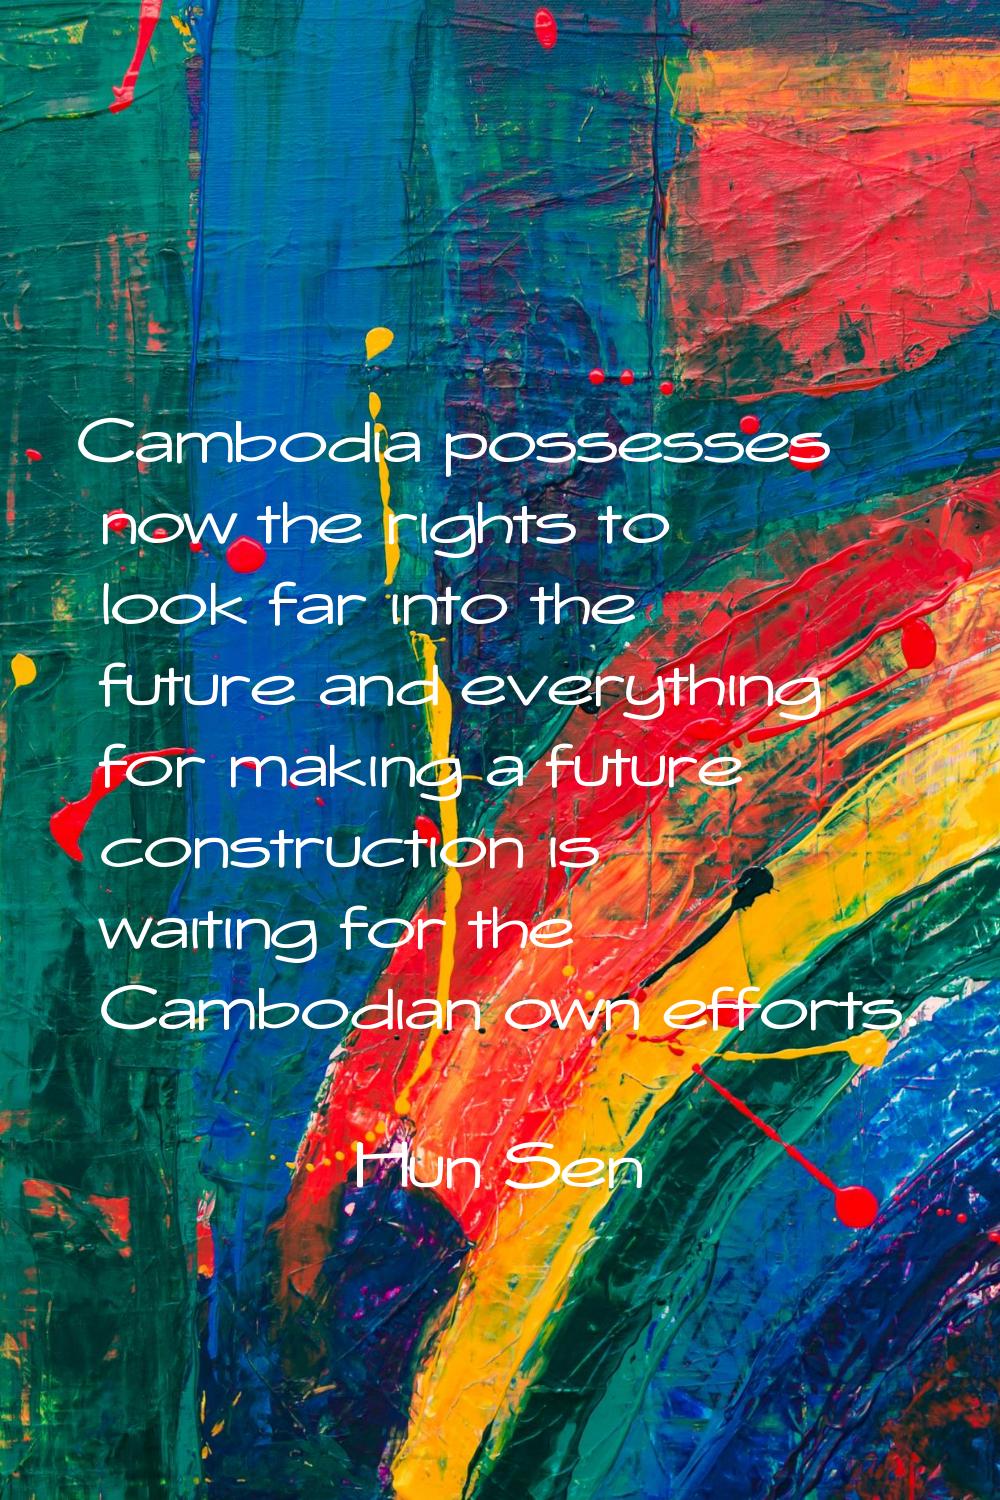 Cambodia possesses now the rights to look far into the future and everything for making a future co